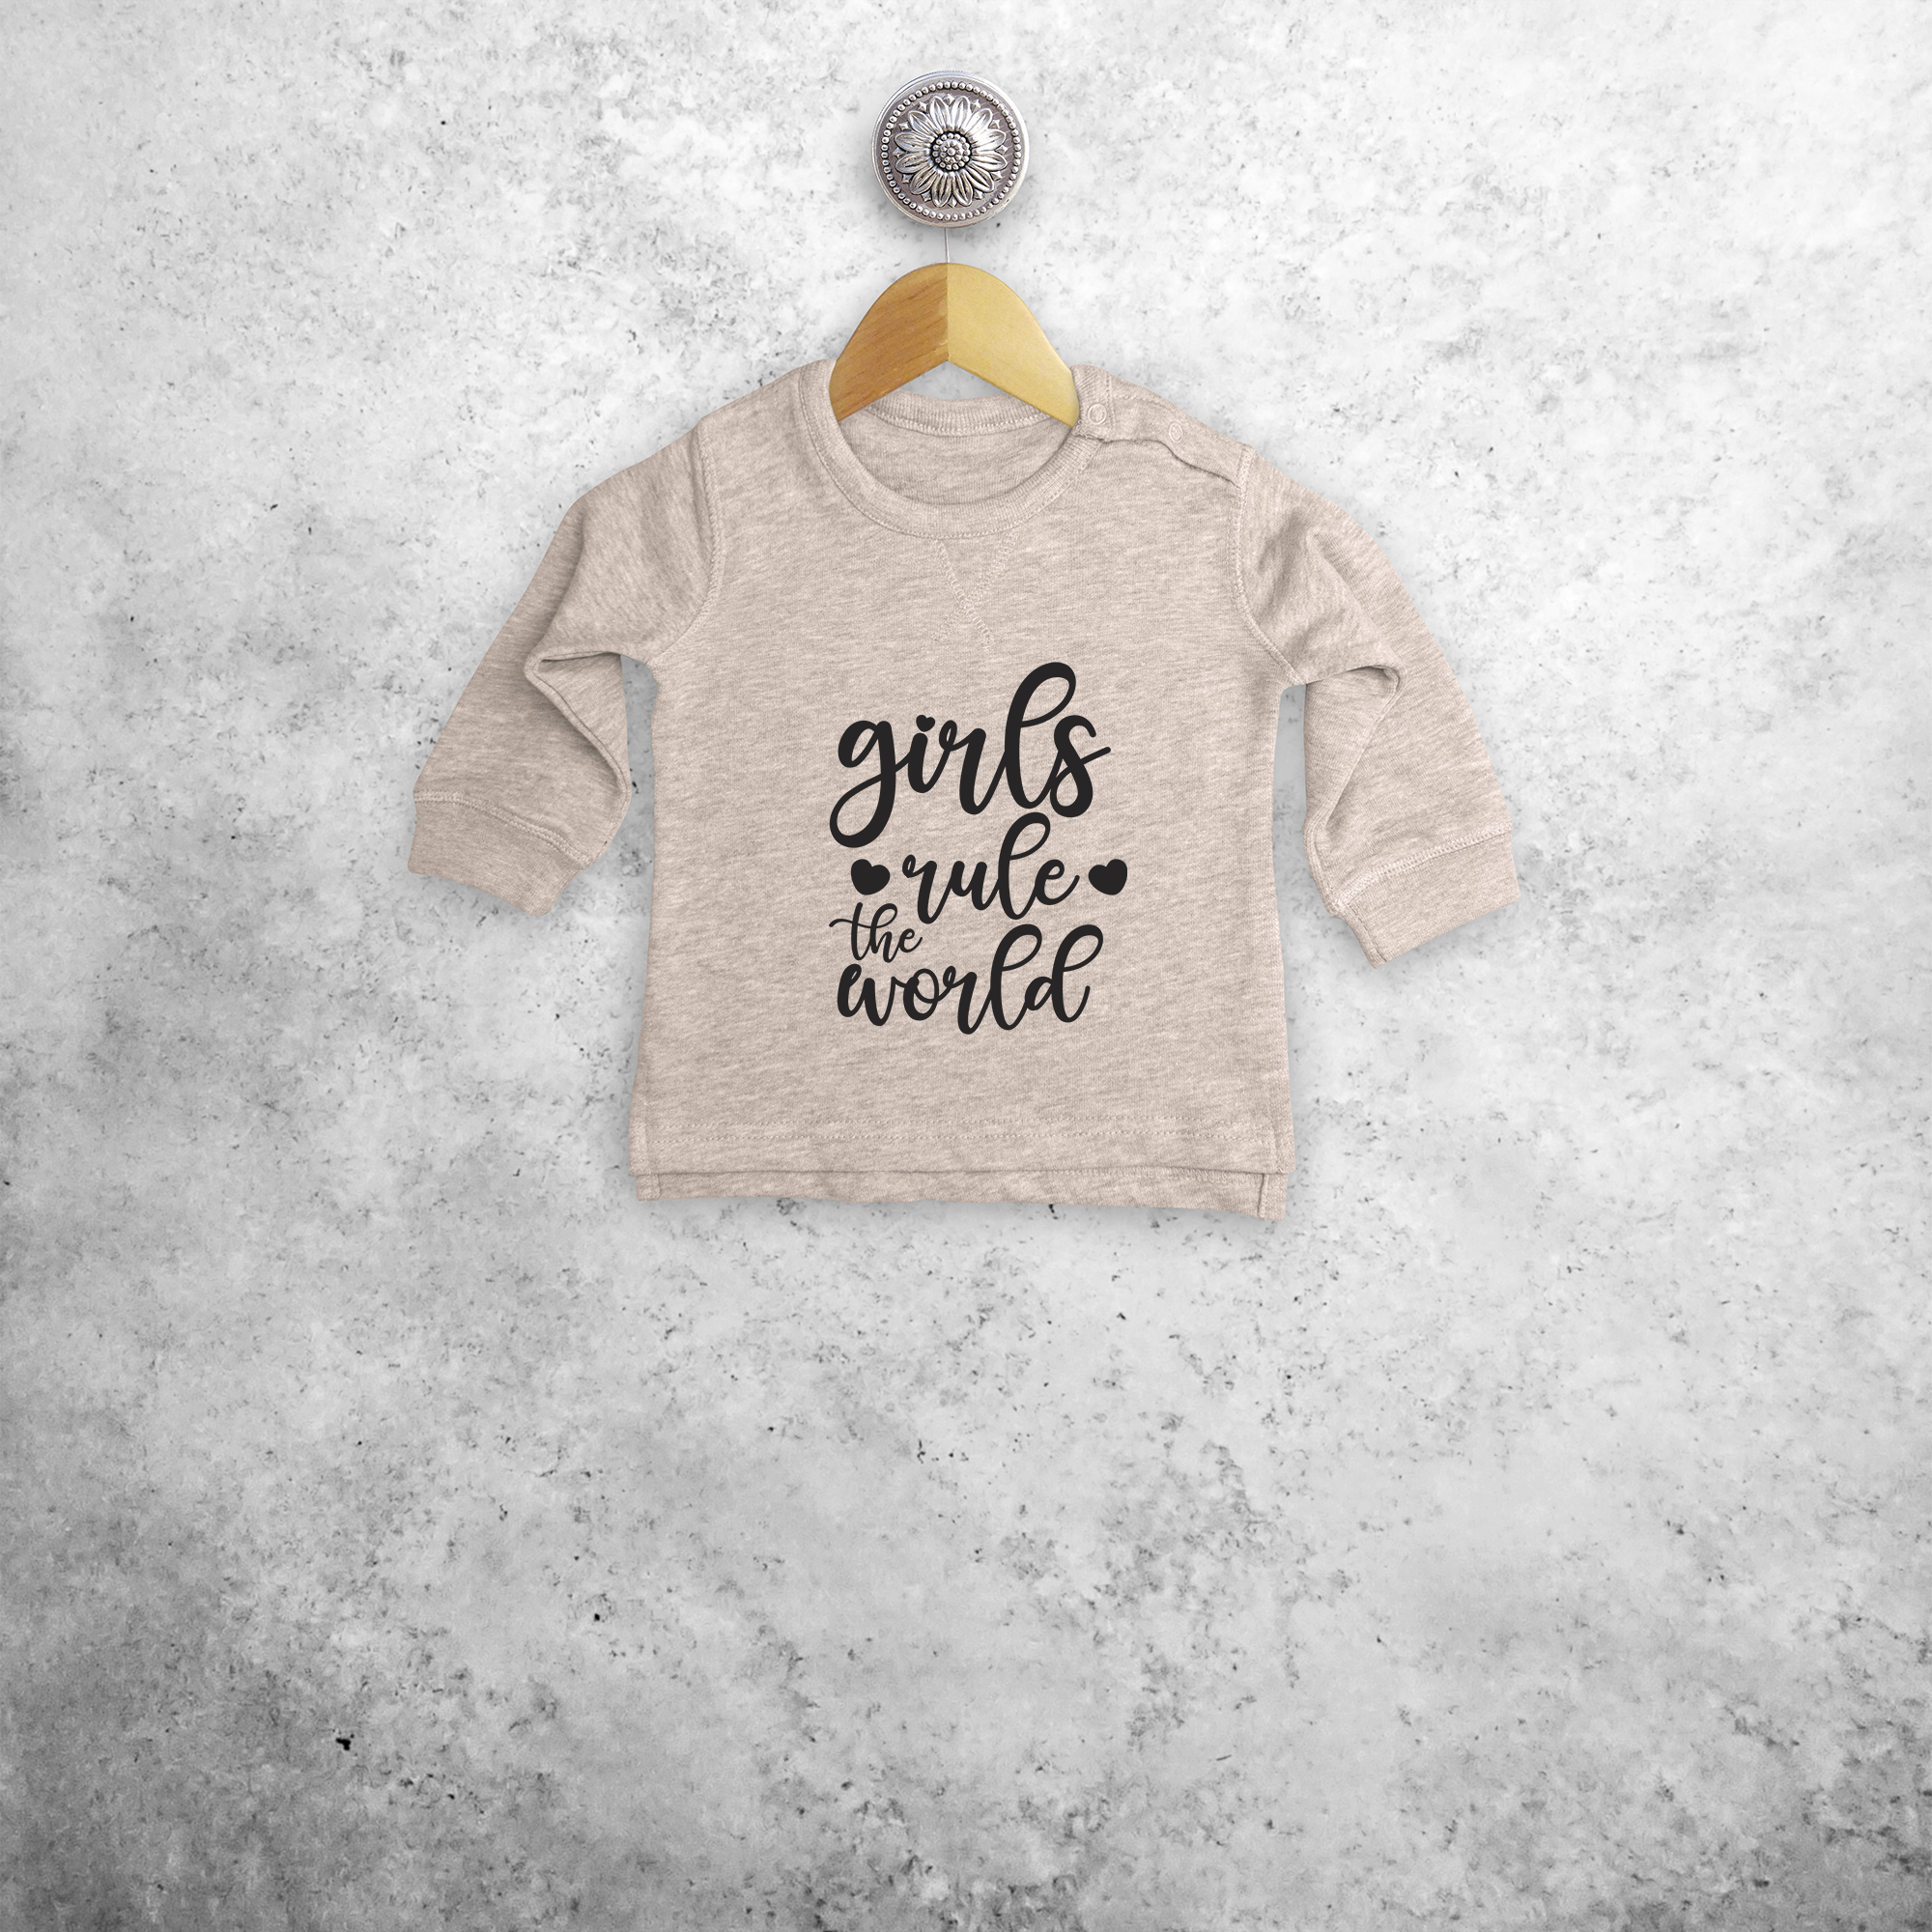 'Girls rule the world' baby sweater